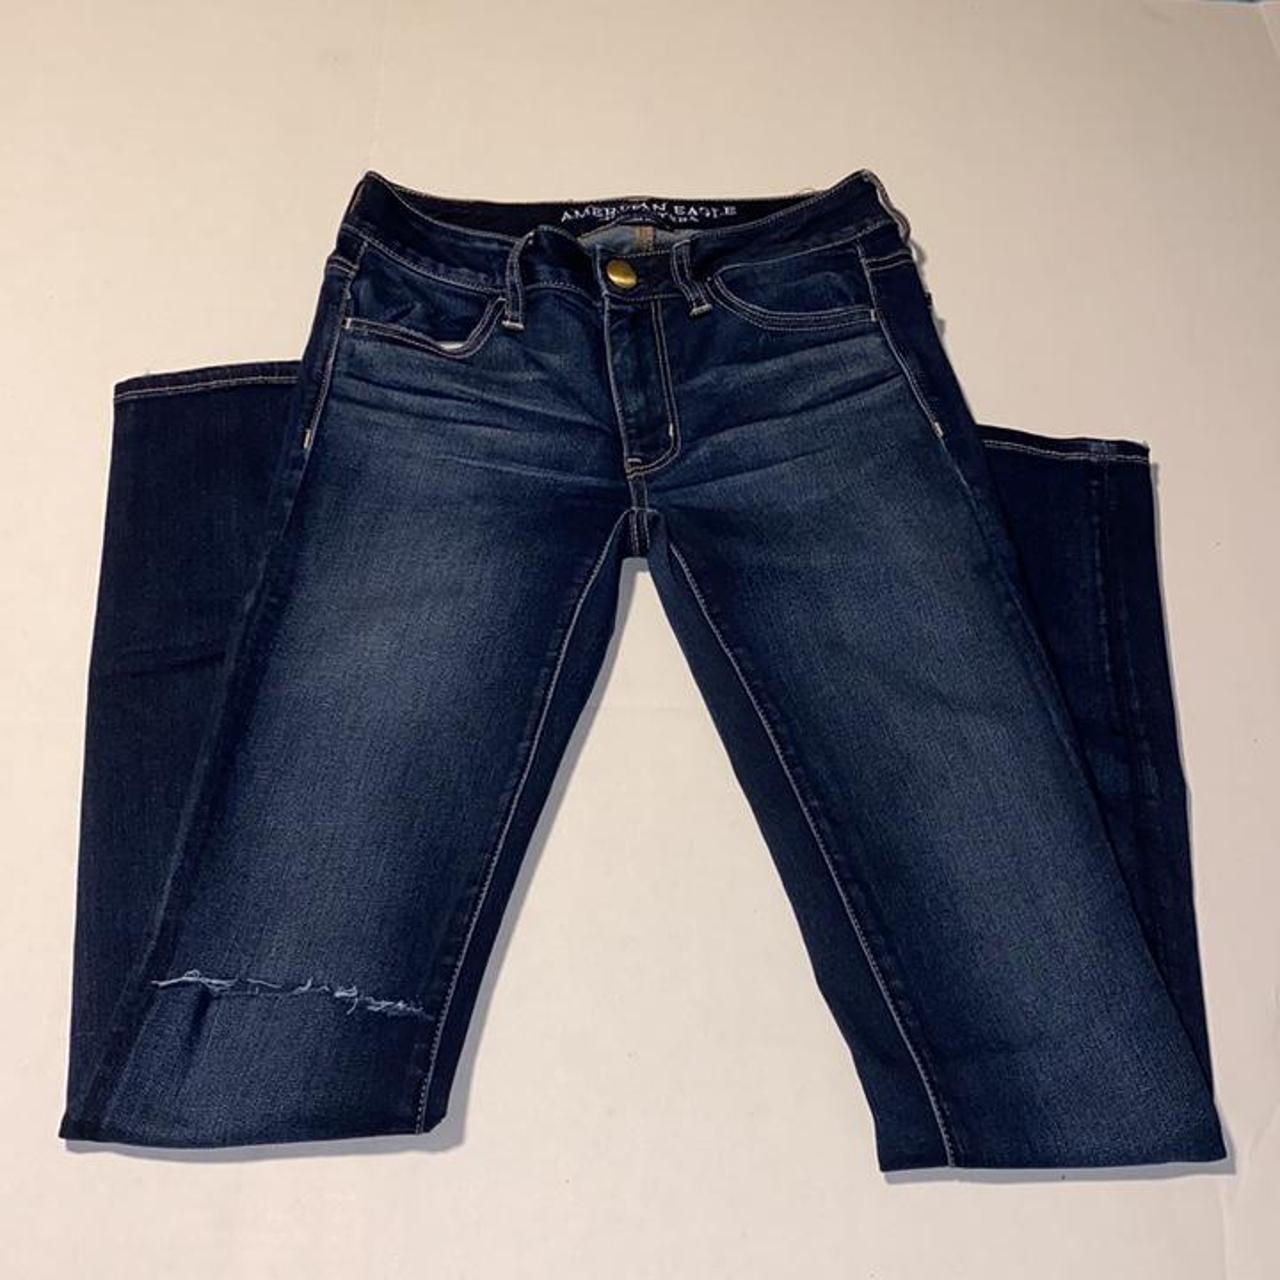 Product Image 2 - American Eagle Super Stretch Jegging

Size